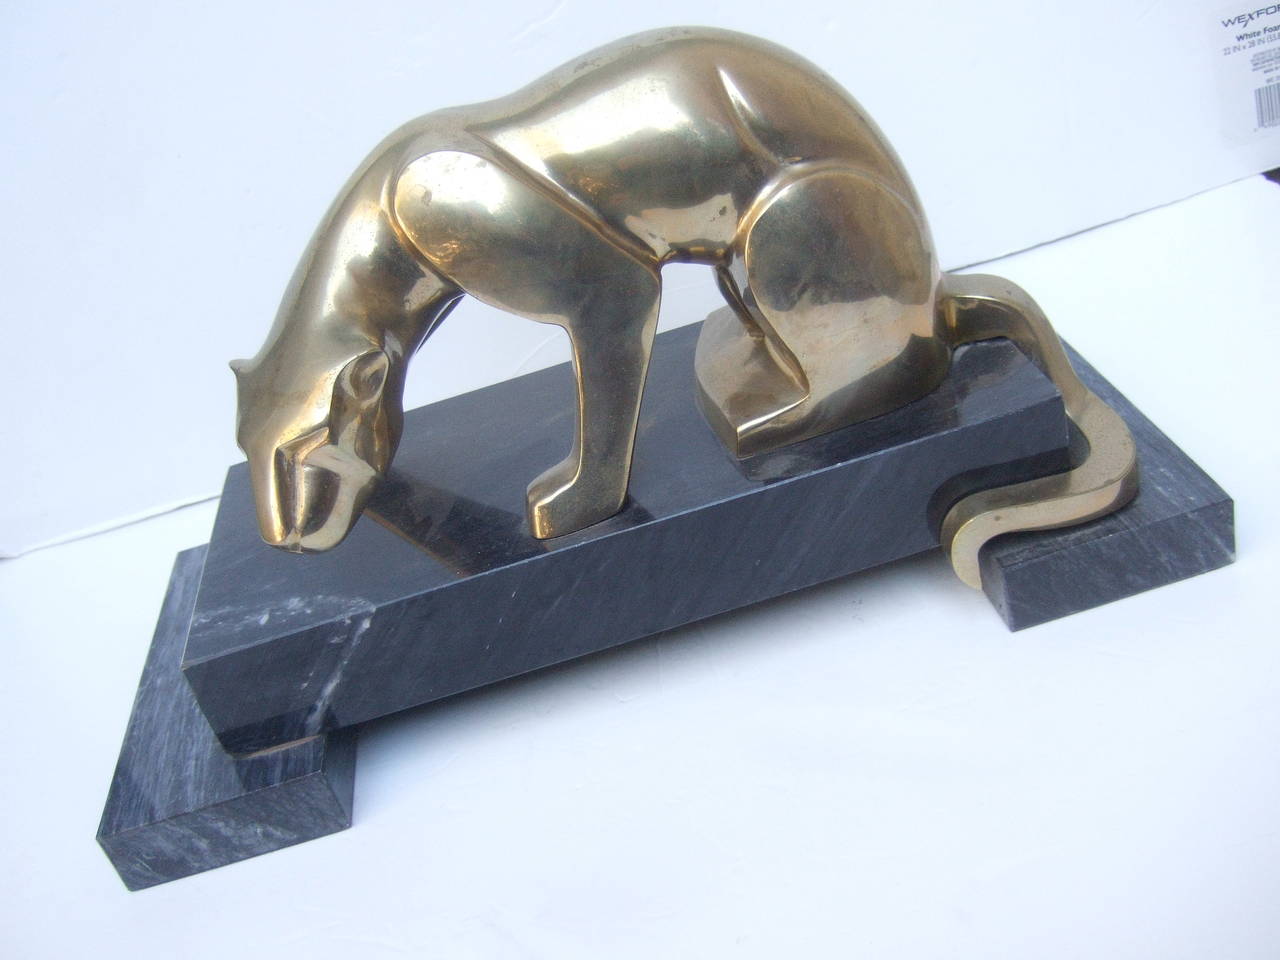 Sleek brass metal panther figure on marble base c 1970s
The exotic panther is designed with solid brass metal percehed on a smokey gray marble base with veining streaks

The stylized panther statue while designed much later has an art deco